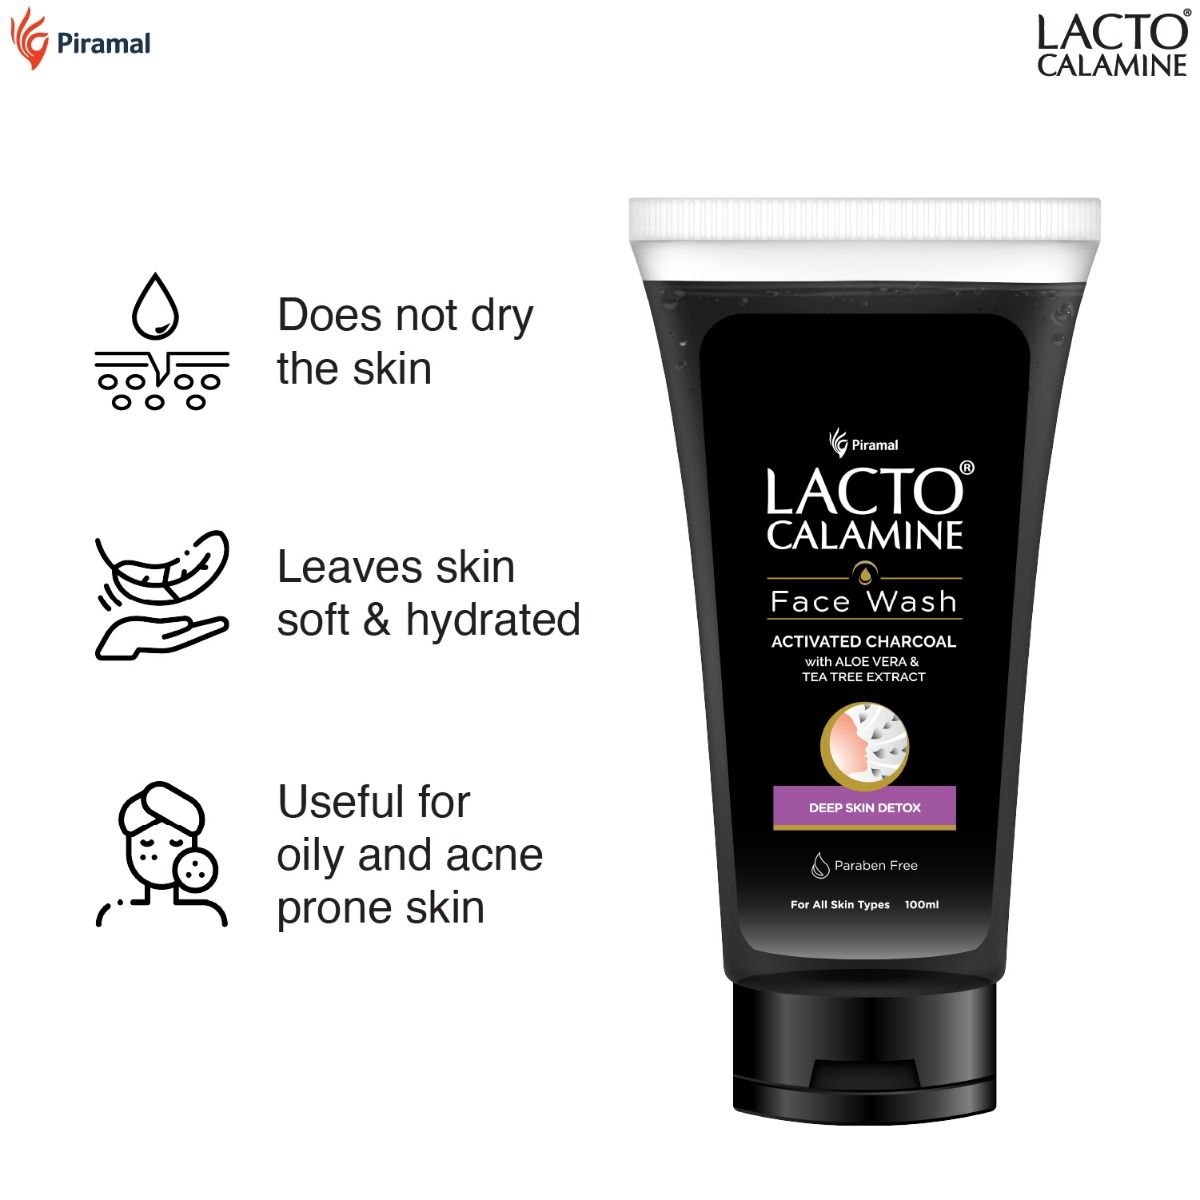 Lacto Calamine Activated Charcoal Face Wash, 100 ml, Pack of 1 